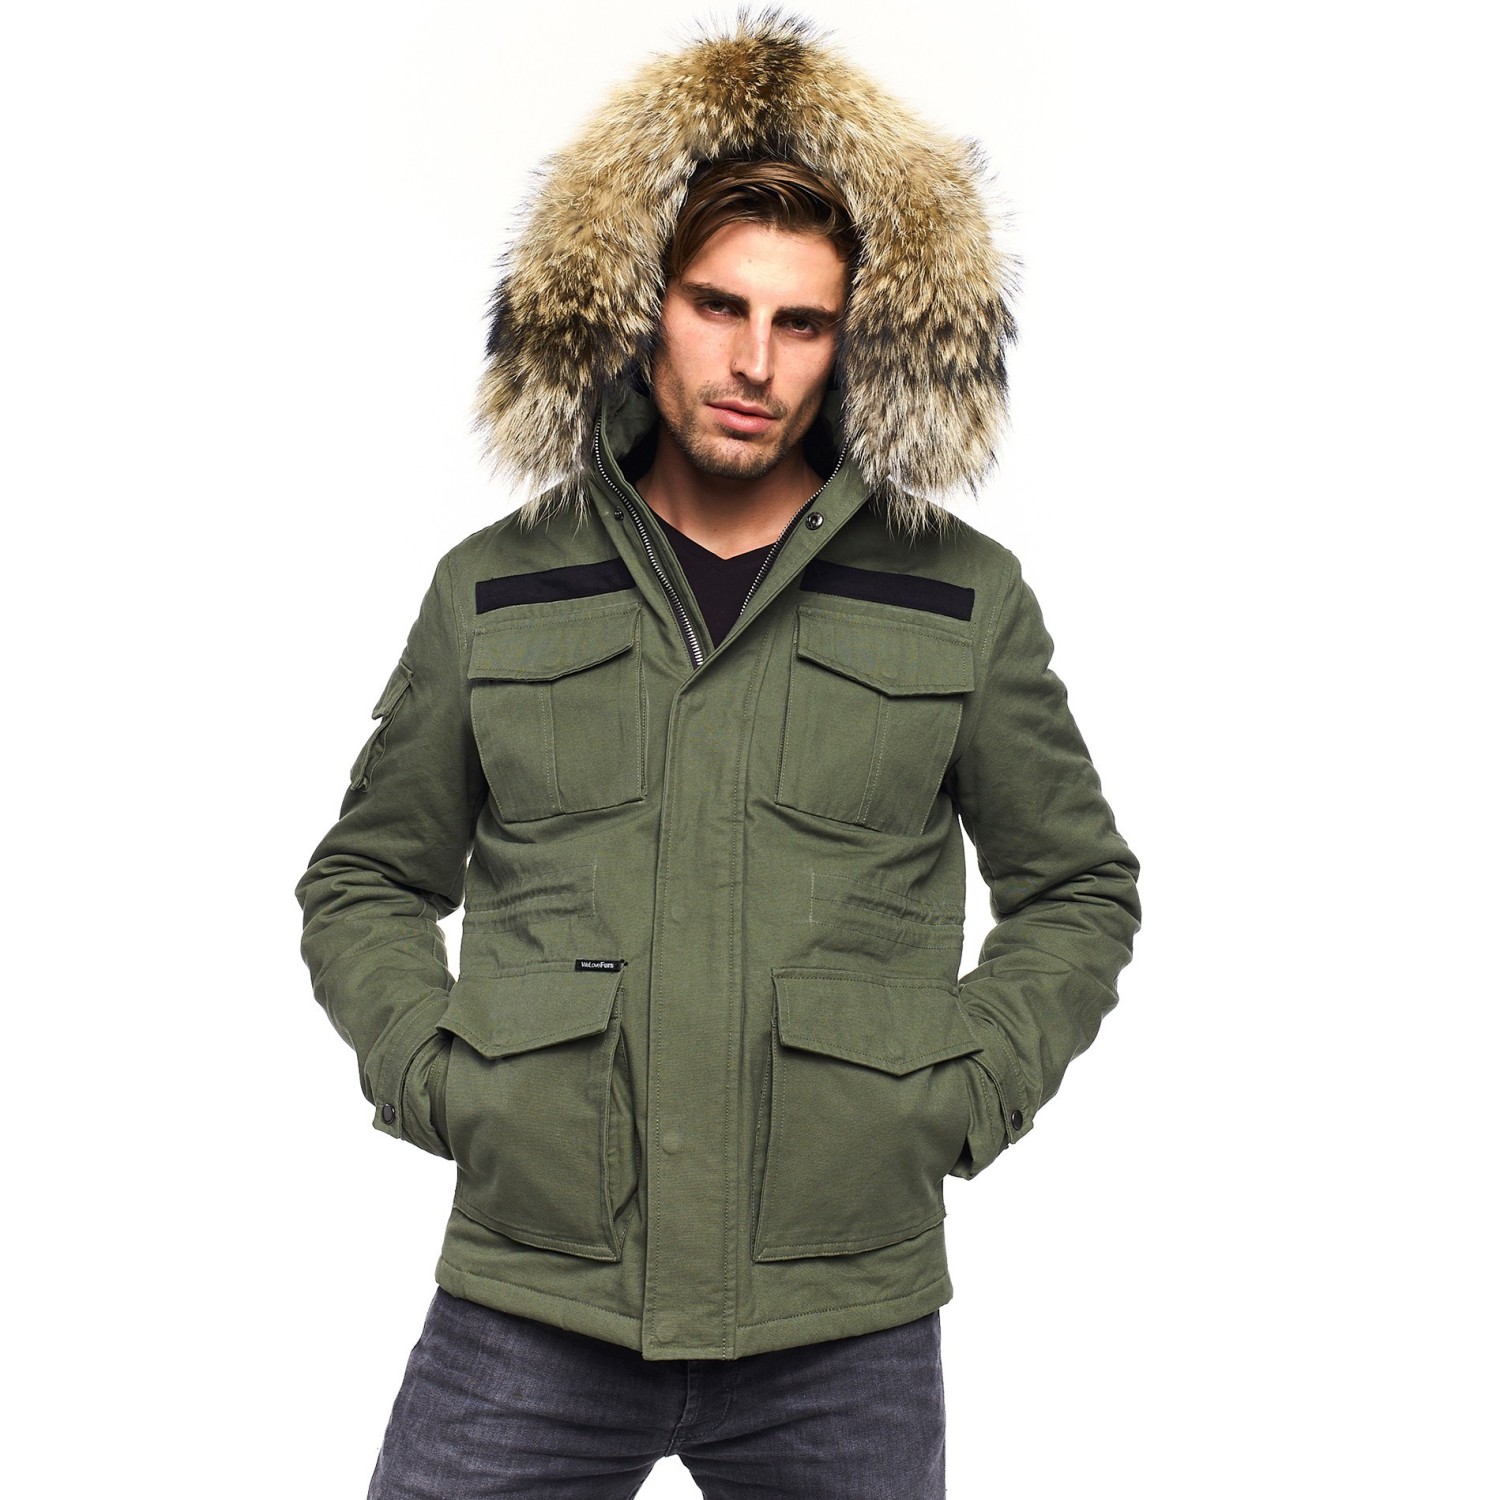 Men’s Army Jacket with fur